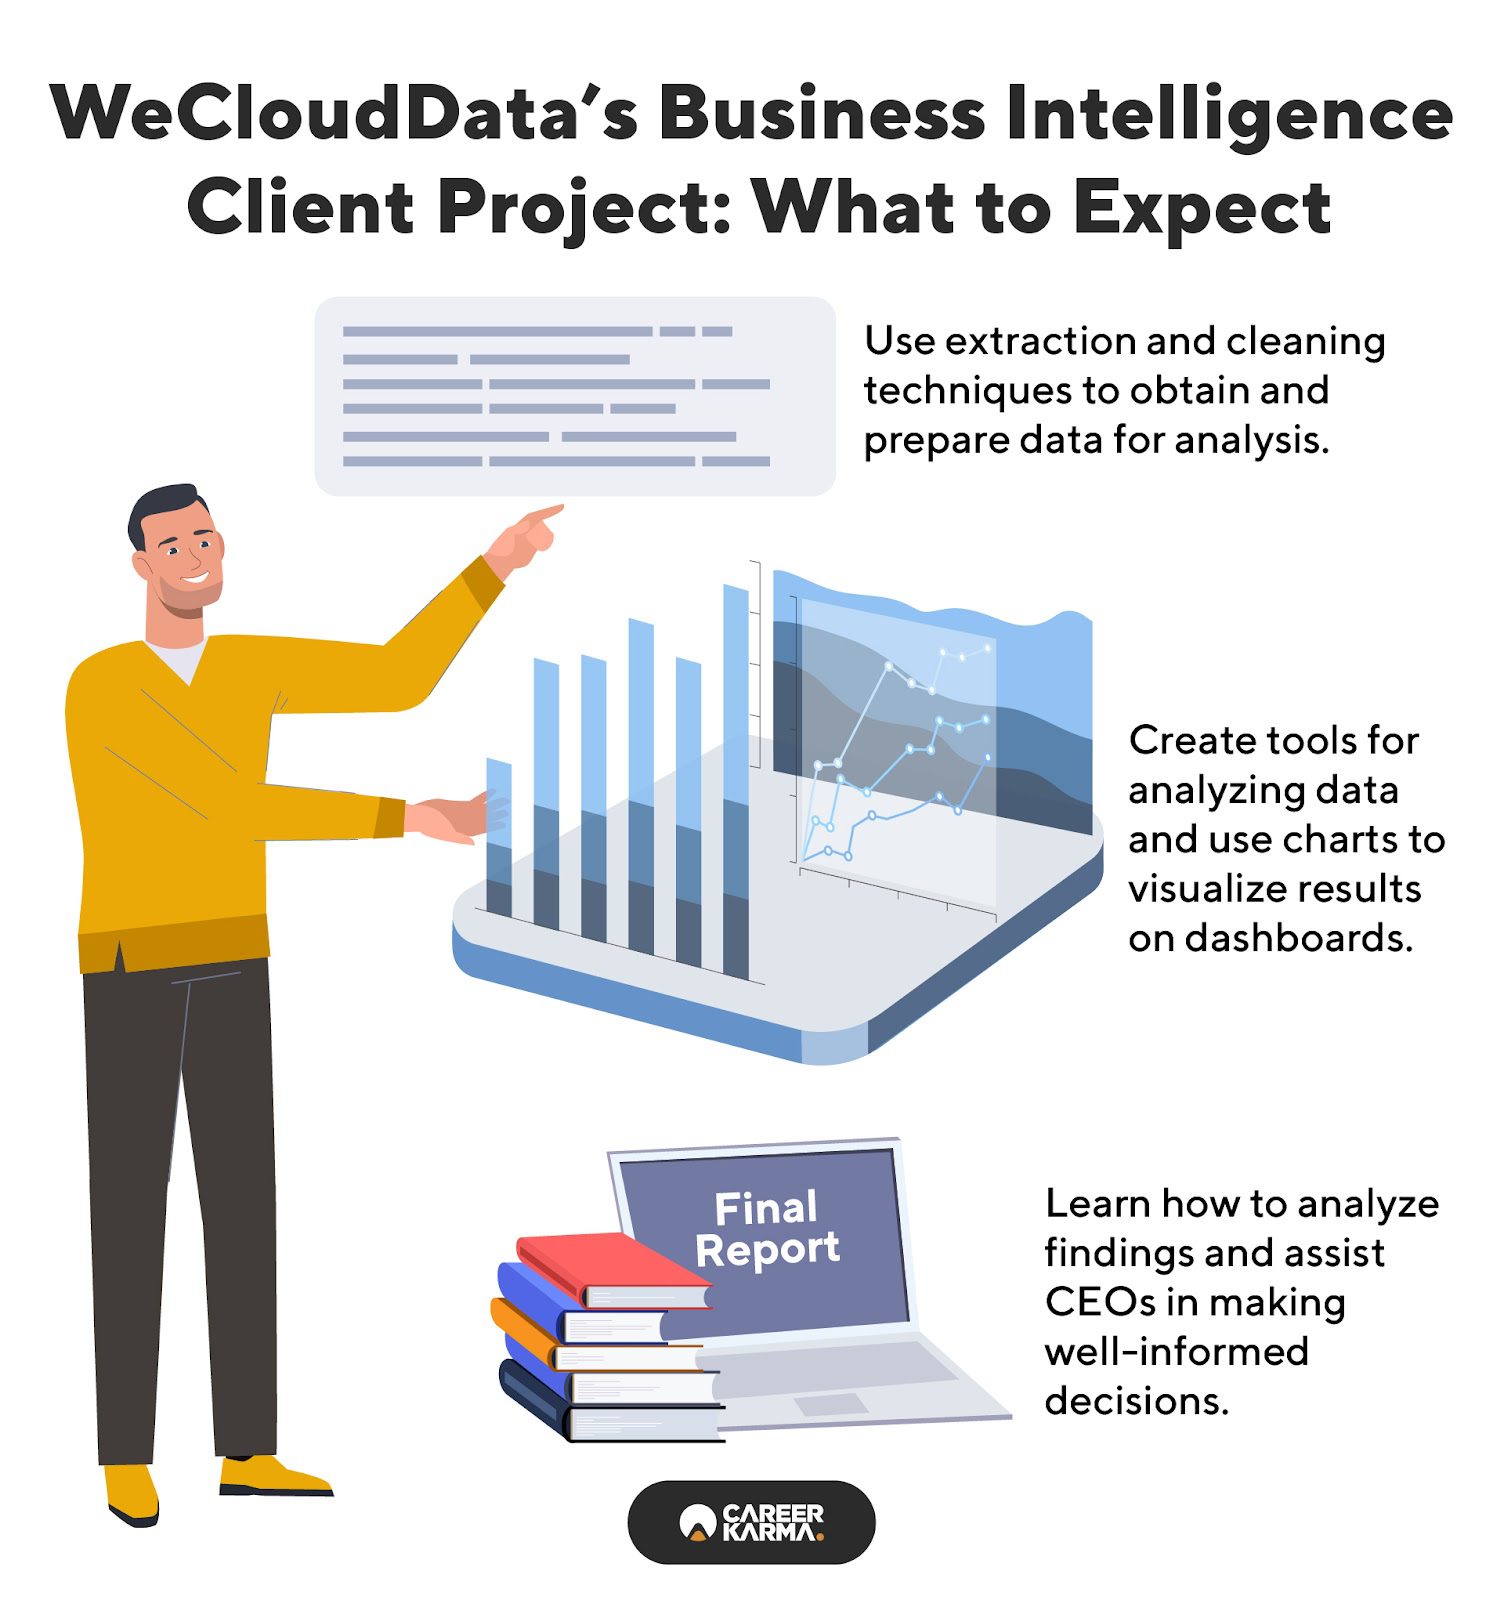 An infographic showing what you’ll expect from WeCloudData’s Business Intelligence Client Project